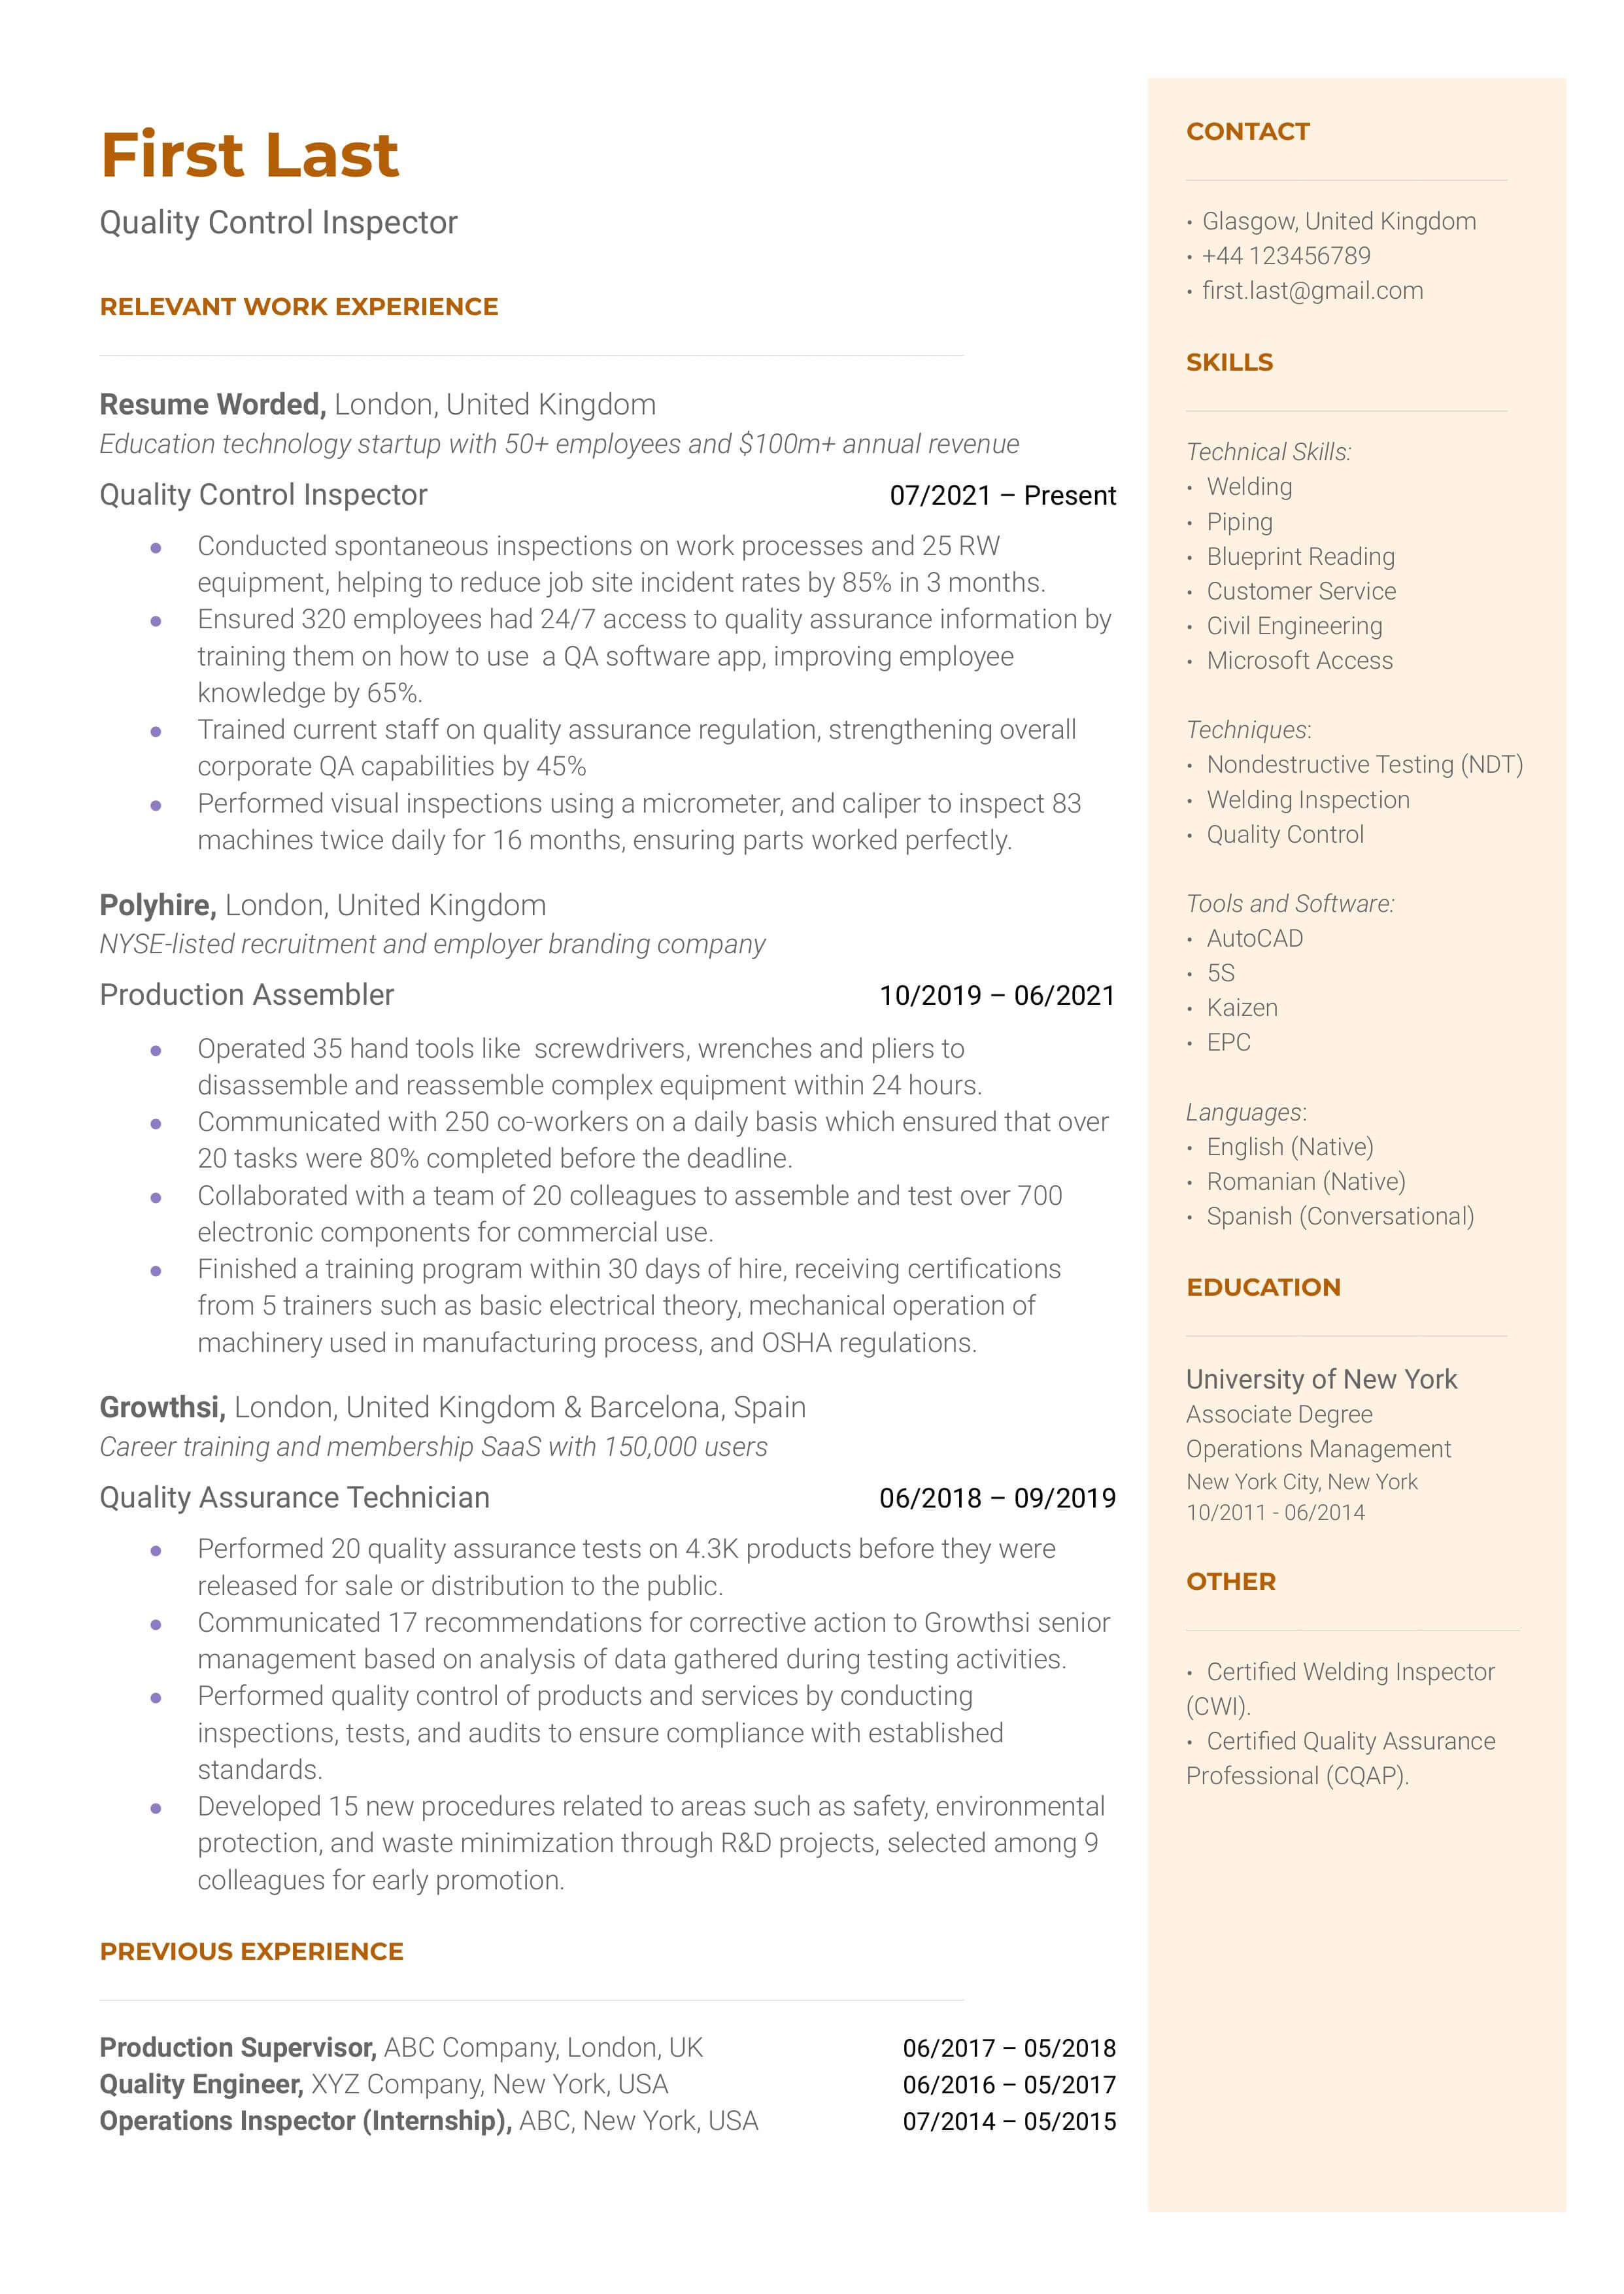 A quality control inspector resume example that includes relevant work experience, skills, and contact information. 